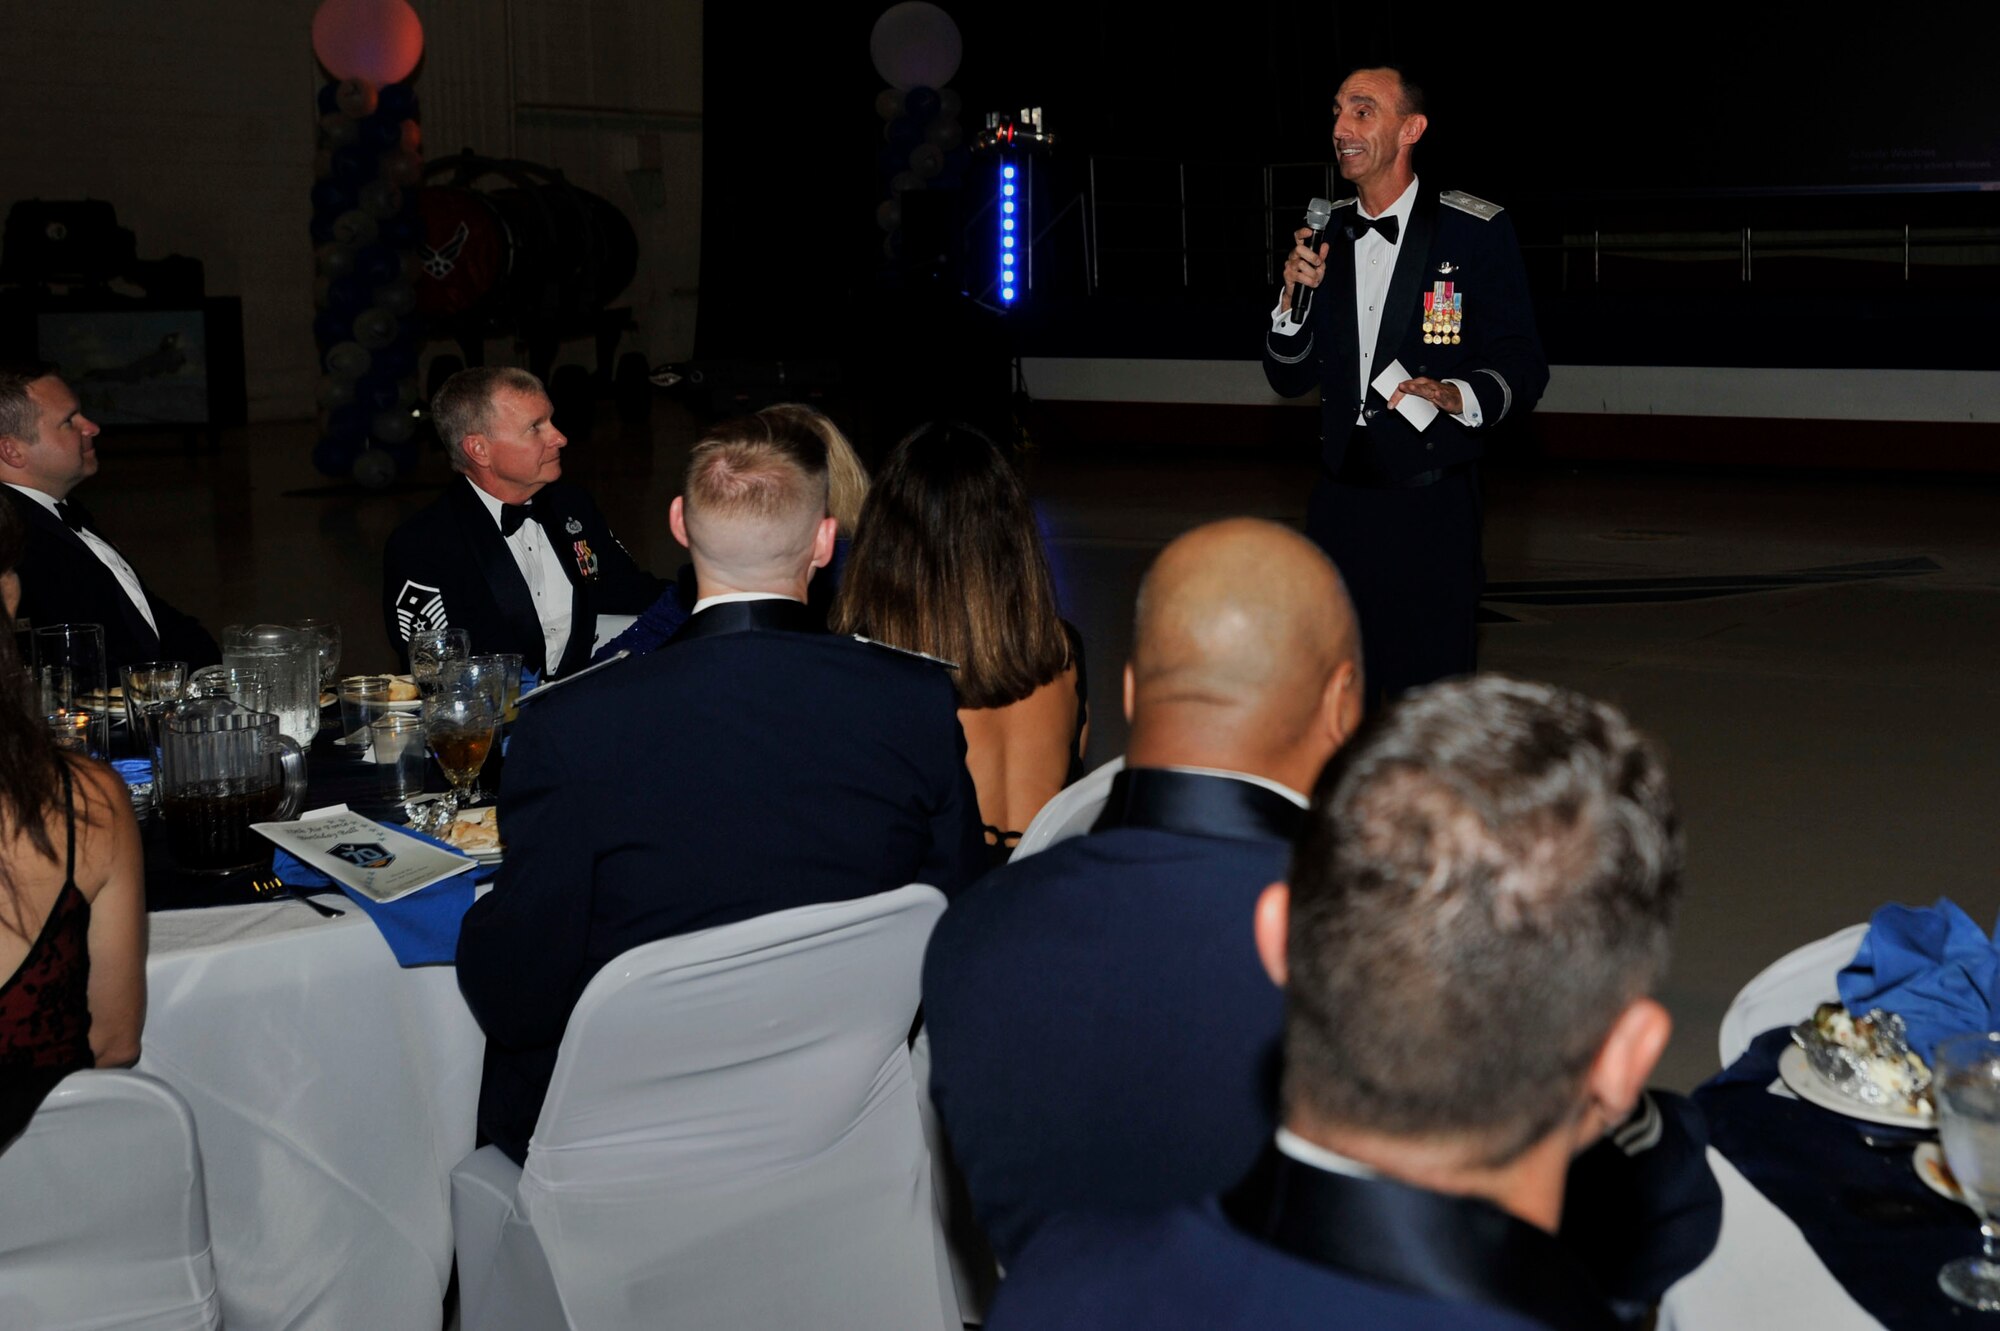 The attendees of the Shaw 2017 Air Force Ball celebrated the Air Force’s 70th birthday and Shaw AFB’s 76th anniversary.